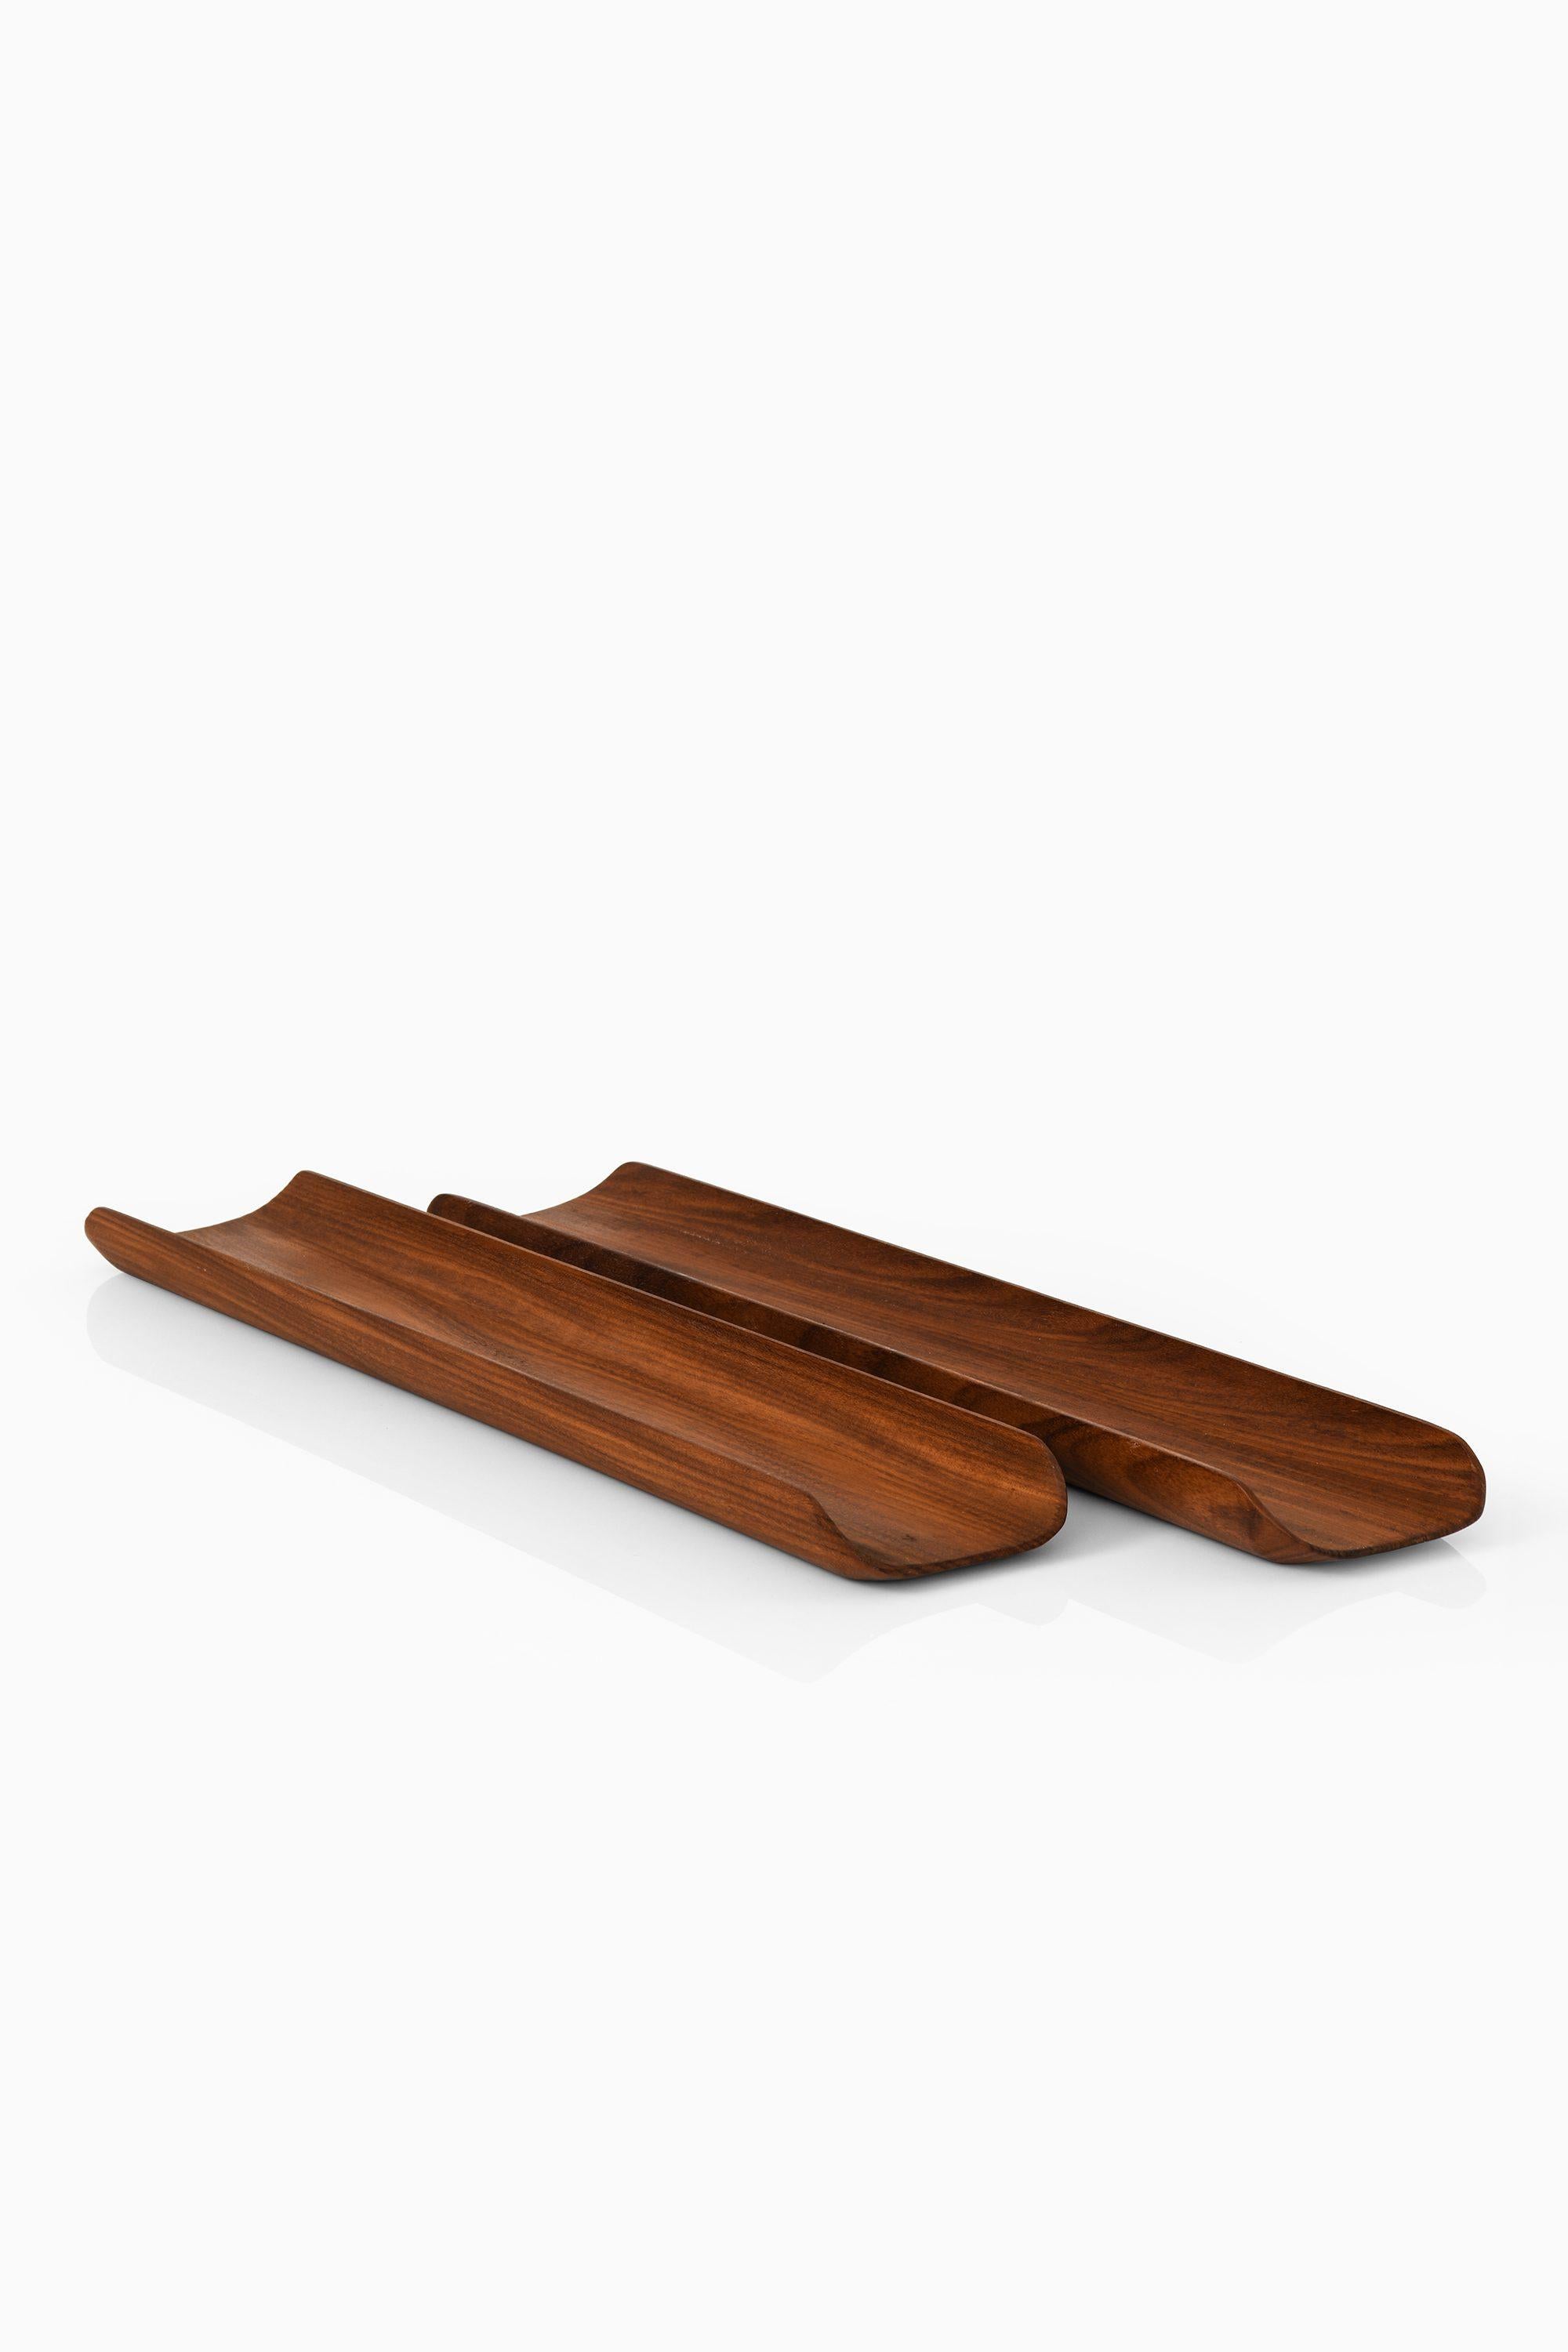 Pair of Trays in Teak By Johnny Mattsson, 1960's

Additional Information:
Material: Teak
Style: Mid century, Scandinavian
Produced by Upsala Slöjd in Sweden
Dimensions (W x D x H): 60 x 10.5 x 3.5 cm
Condition: Good vintage condition, with minor